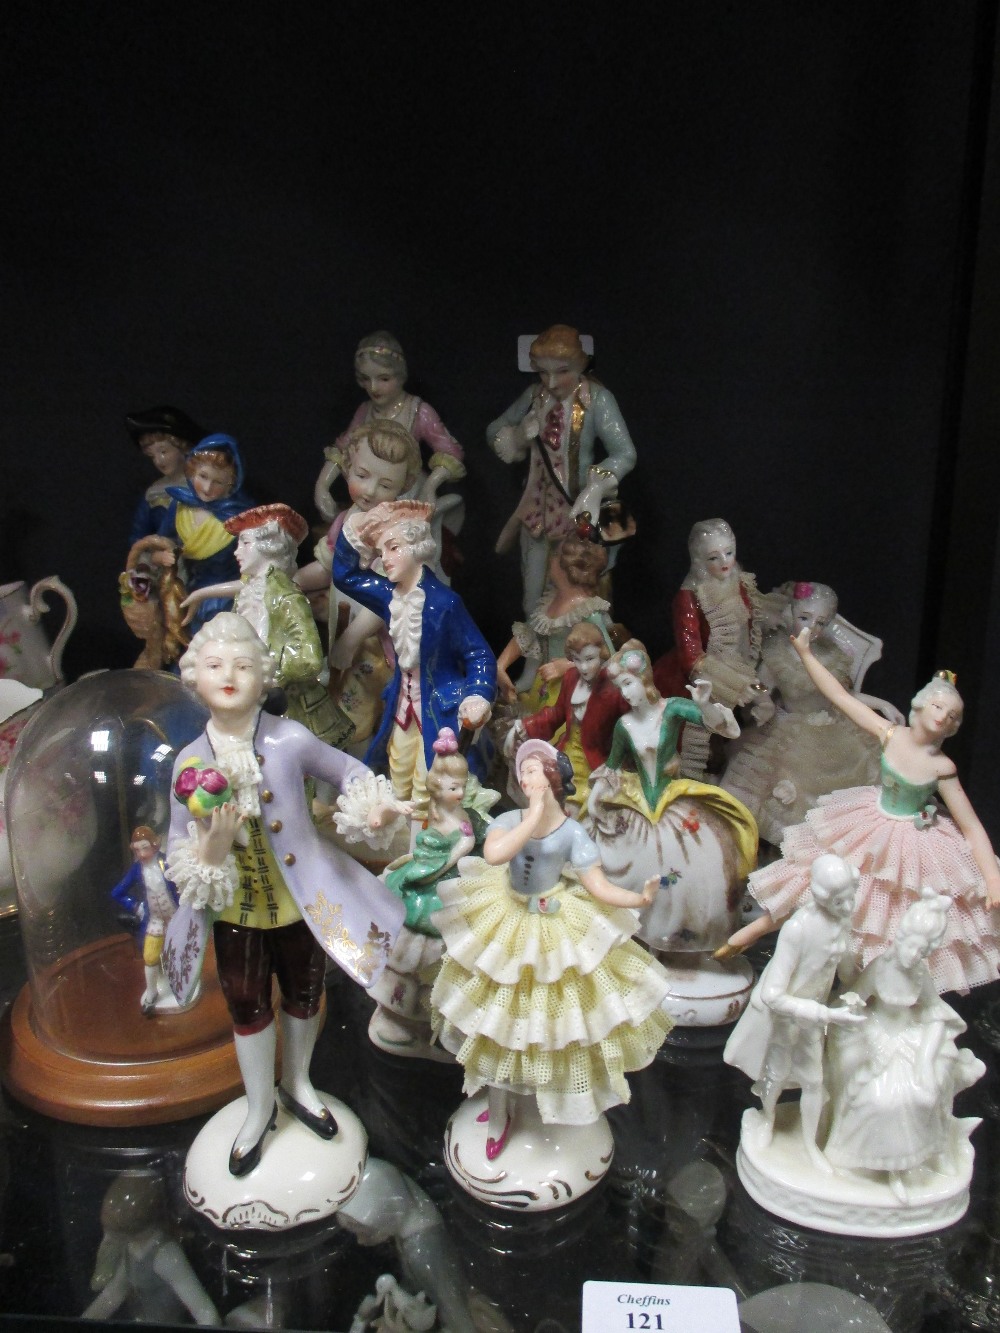 A quantity of porcelain figurines in 18th century dress